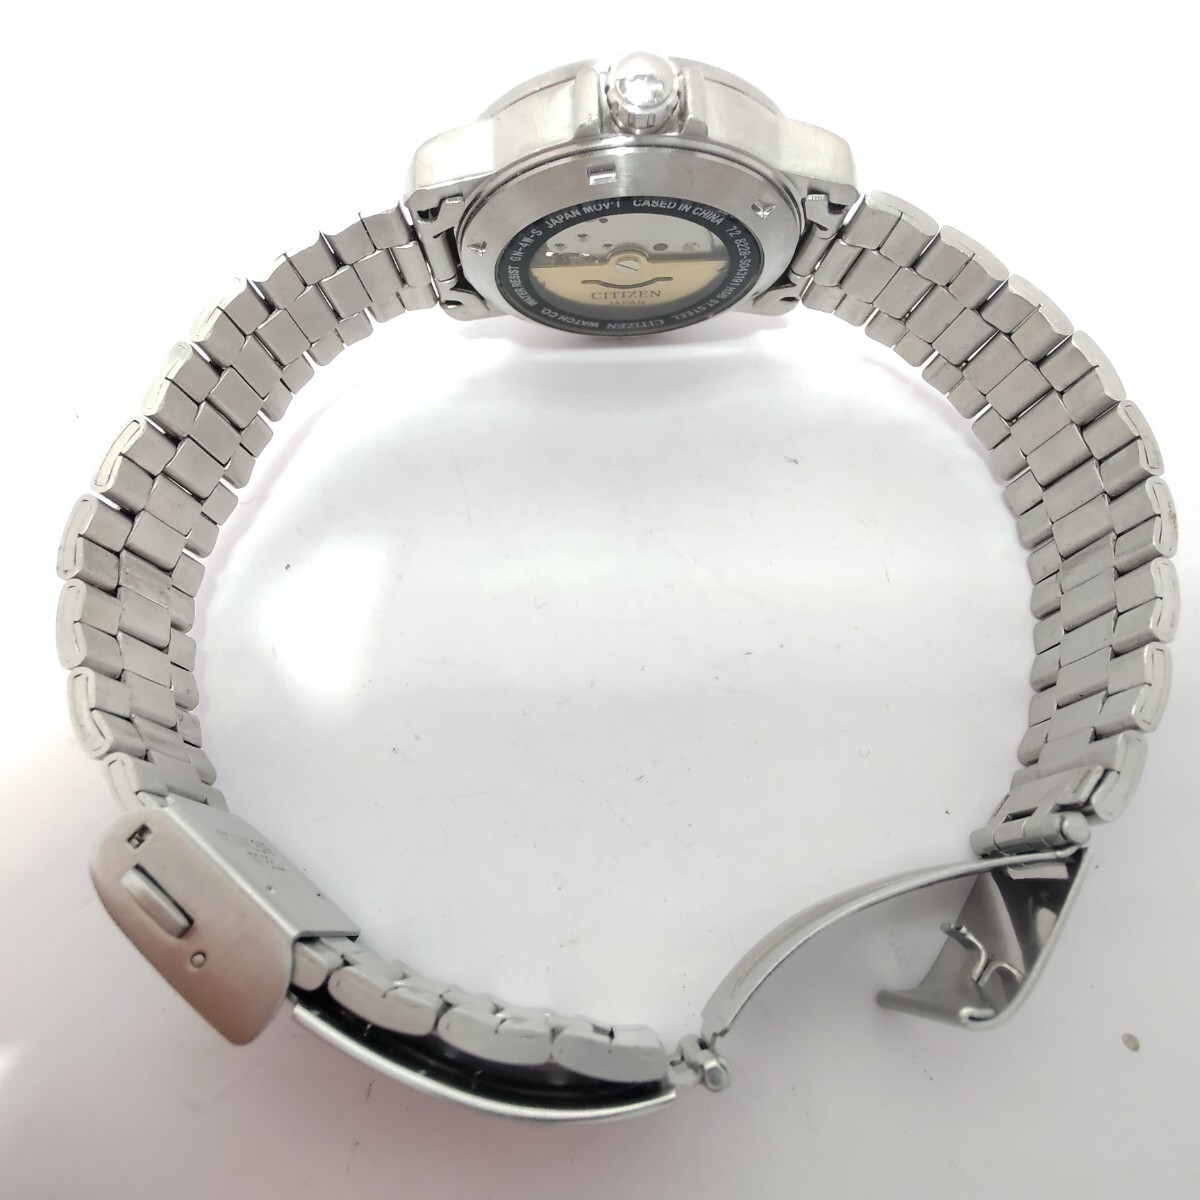 CITIZEN Gainer シチズン ゲイナー 8228-S043191／21JEWELS／AUTOMATIC自動巻／稼働品☆１円～_画像7